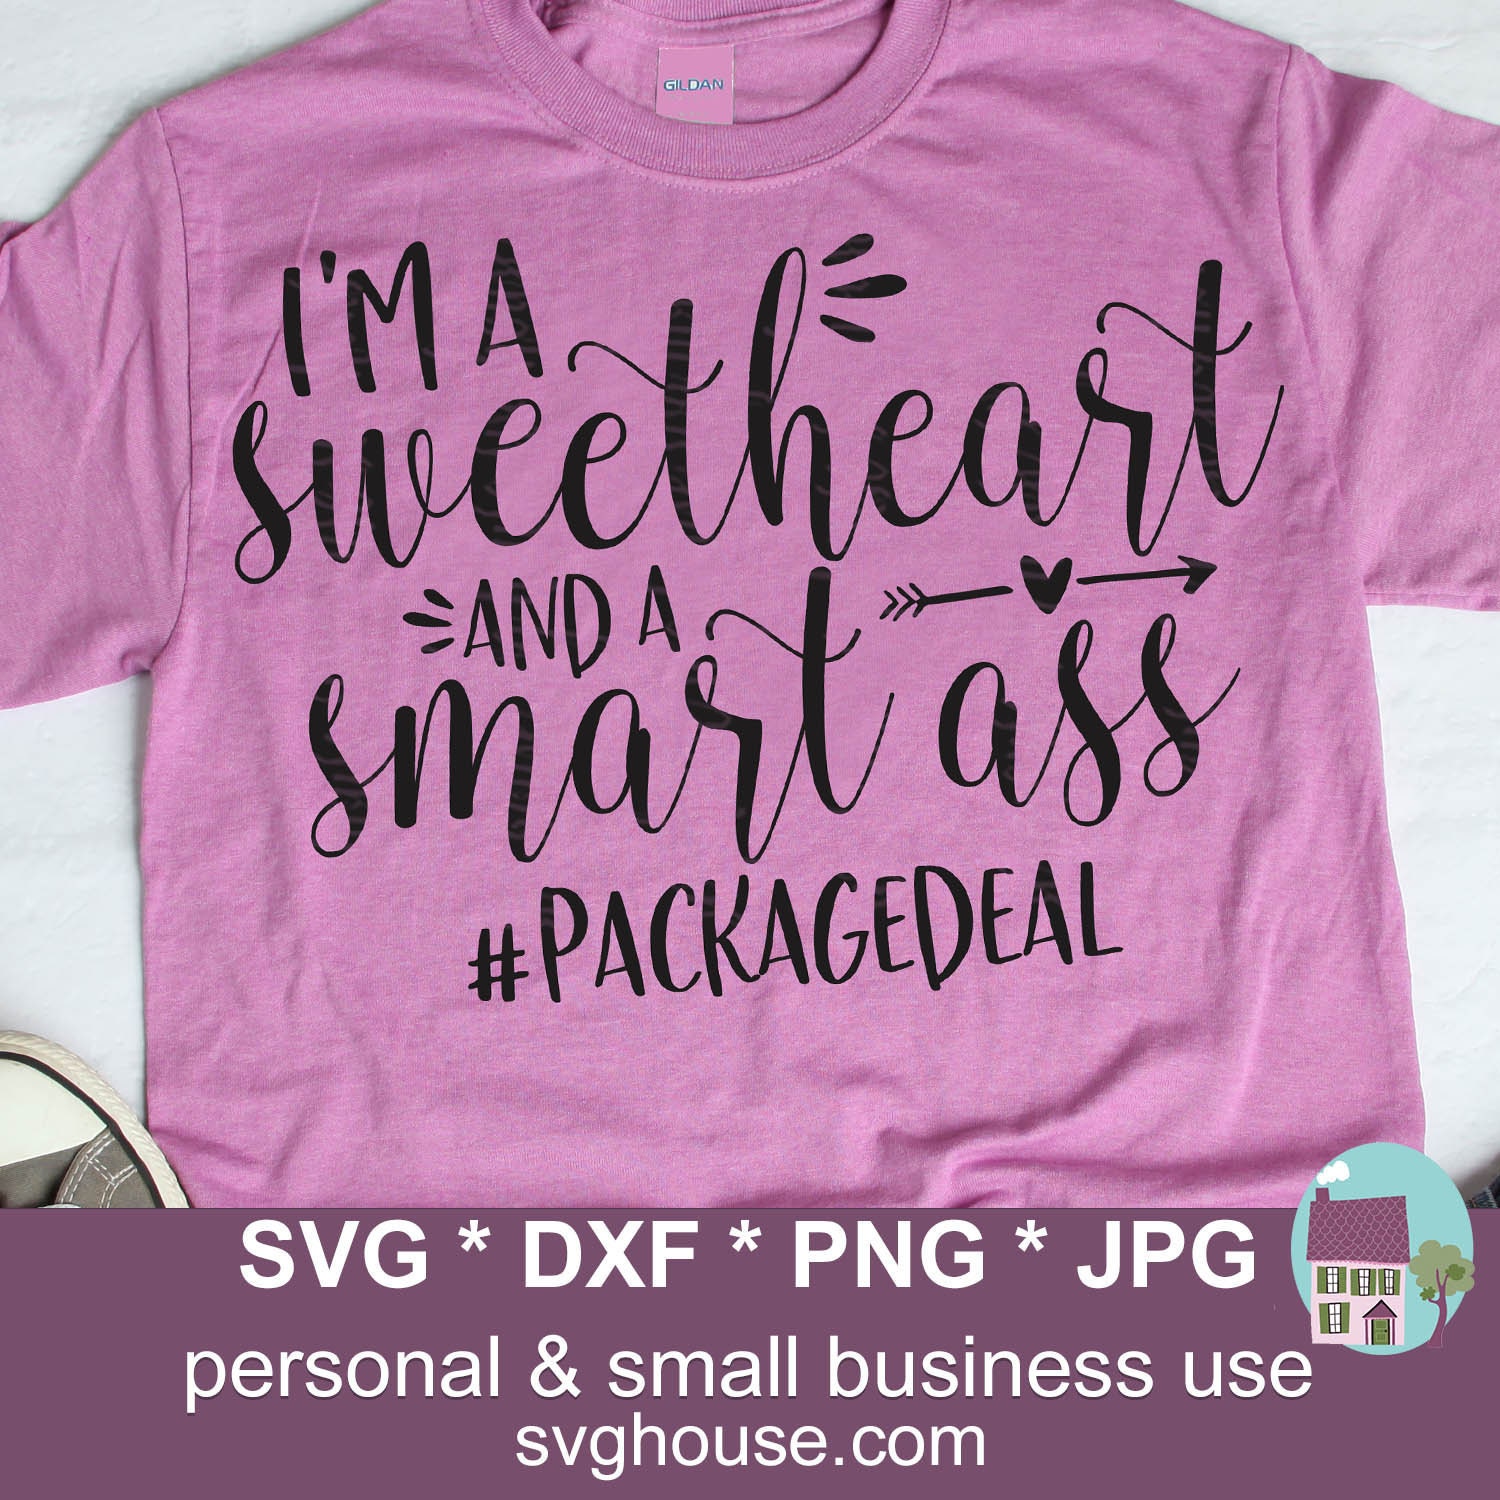 I'm A Sweetheart and A Smart Ass SVG Funny Cut Files for | Etsy